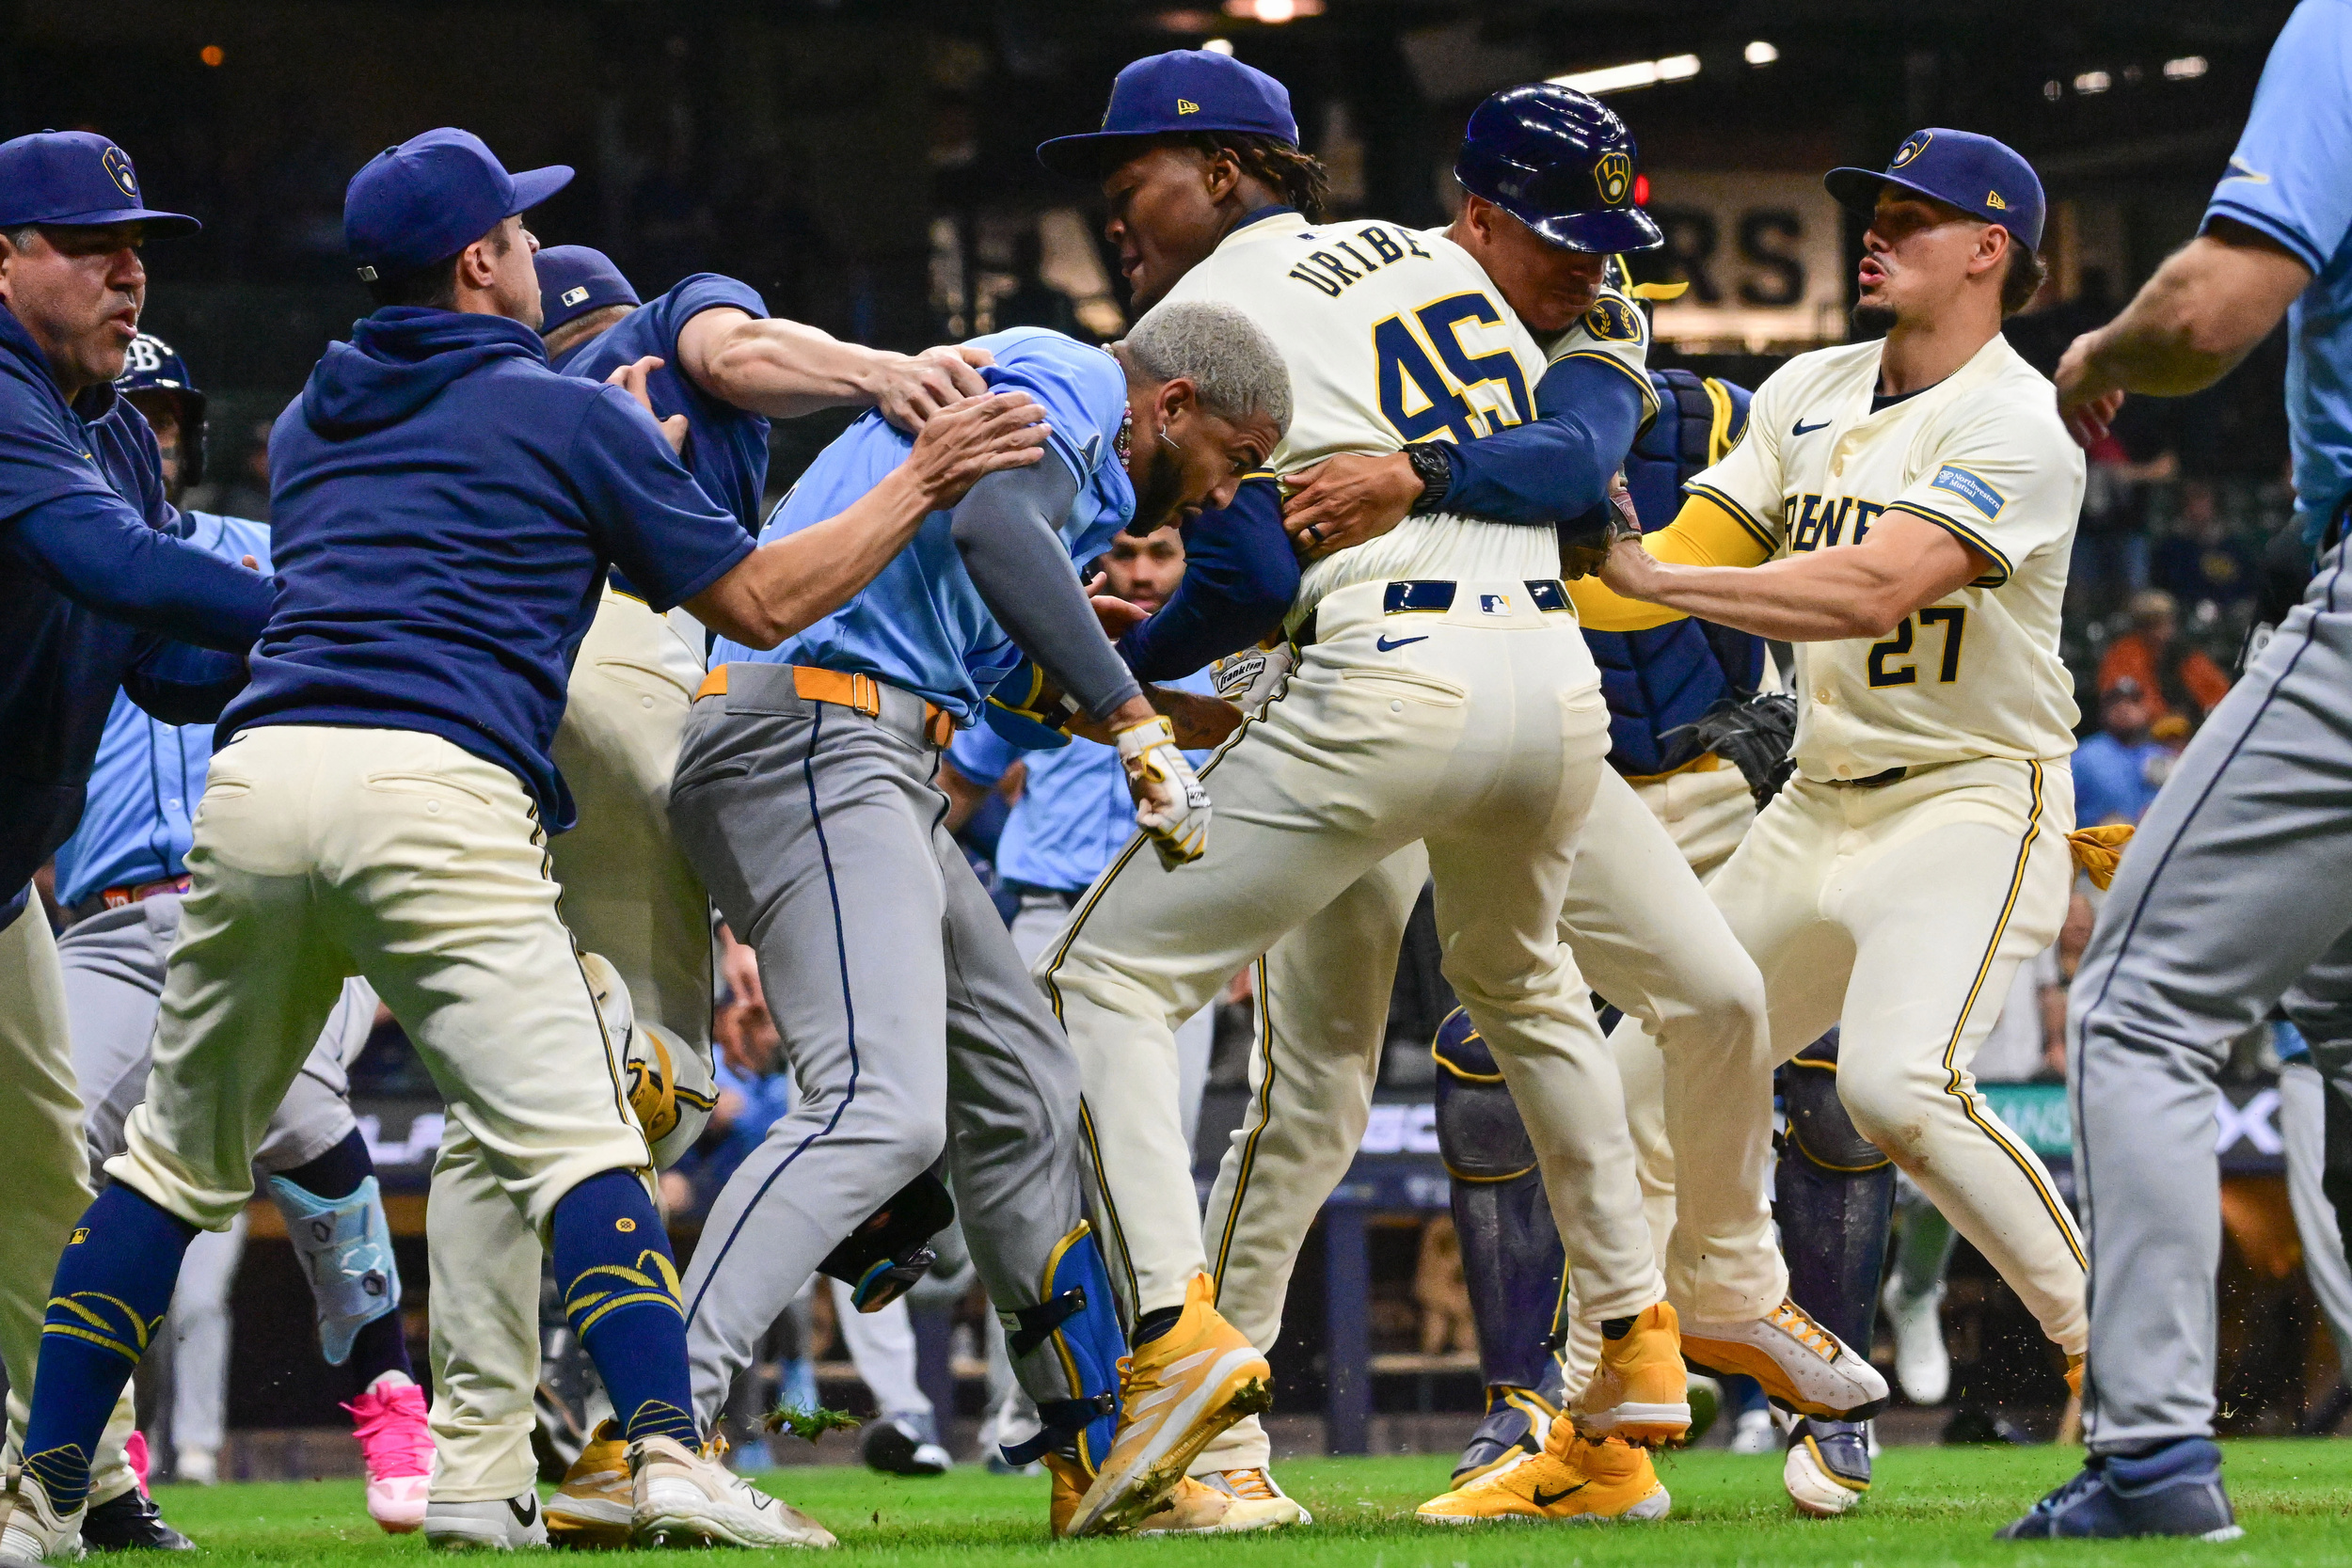 mlb hands out multiple suspensions for rays-brewers brawl